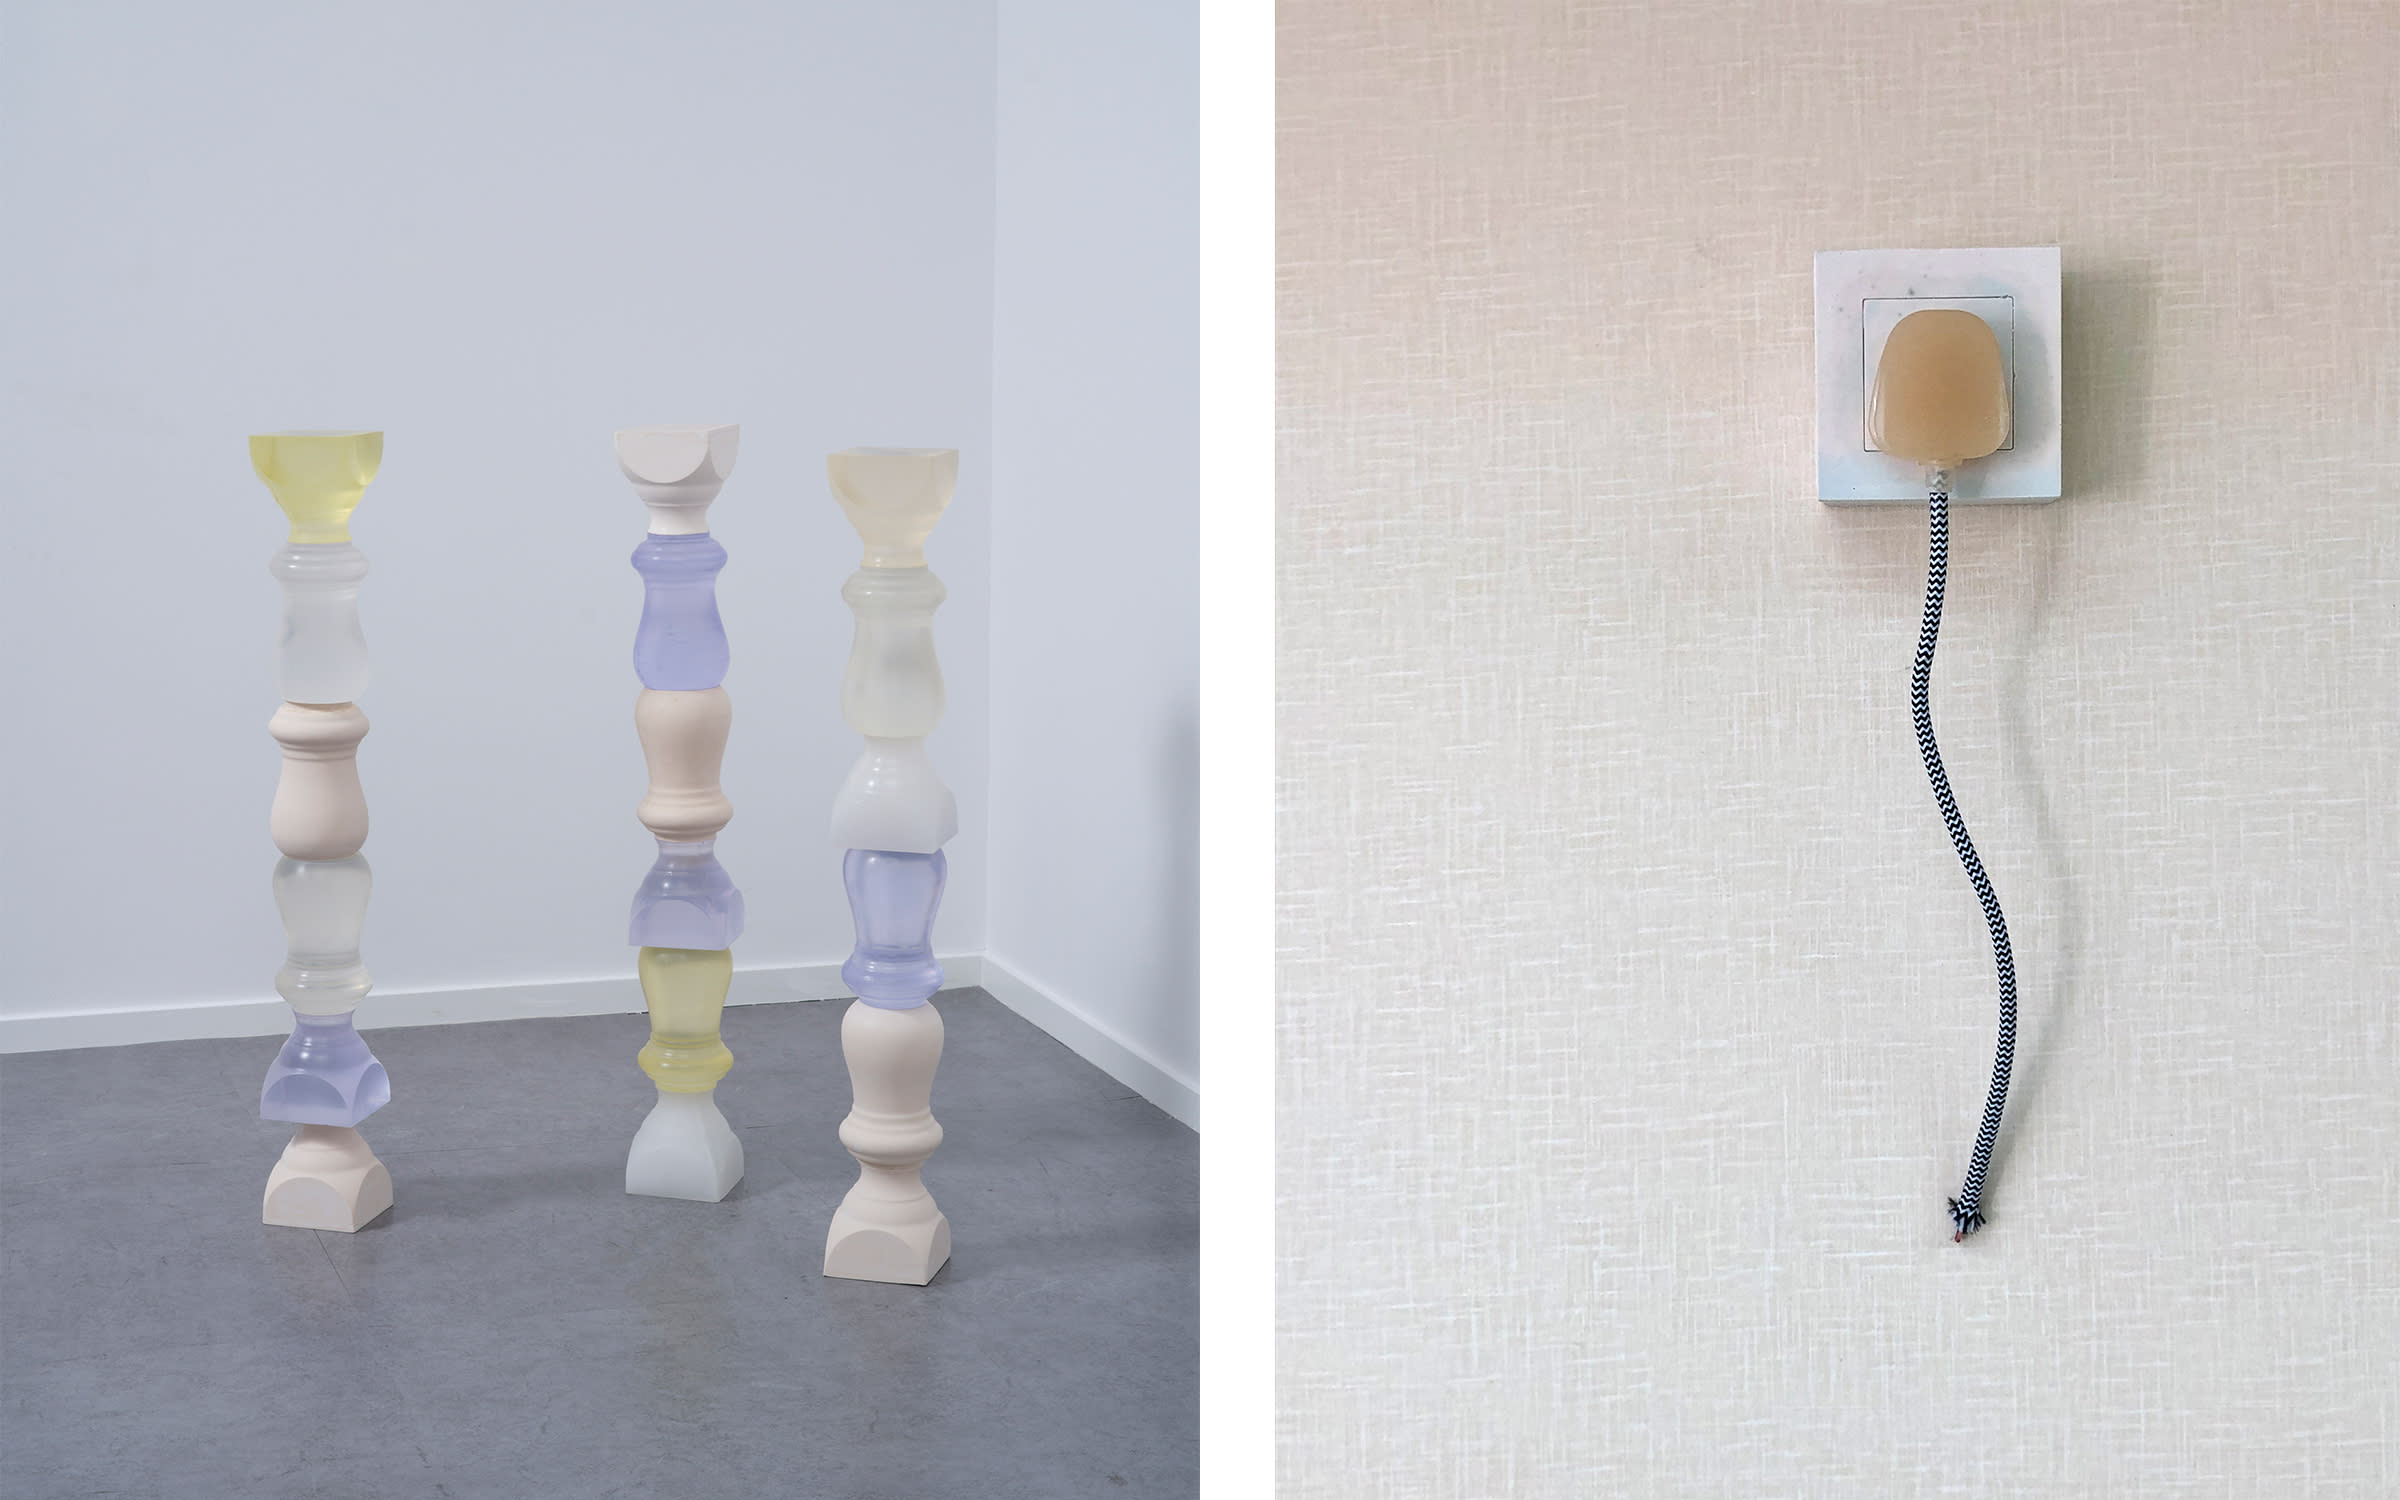 Left: Tap Chan, 2.5 Dimensional Modules, 2021. Right: Tap Chan, Breaking the Normal Flow of Time, 2021. Courtesy of the artist and Mine Projects, Hong Kong.